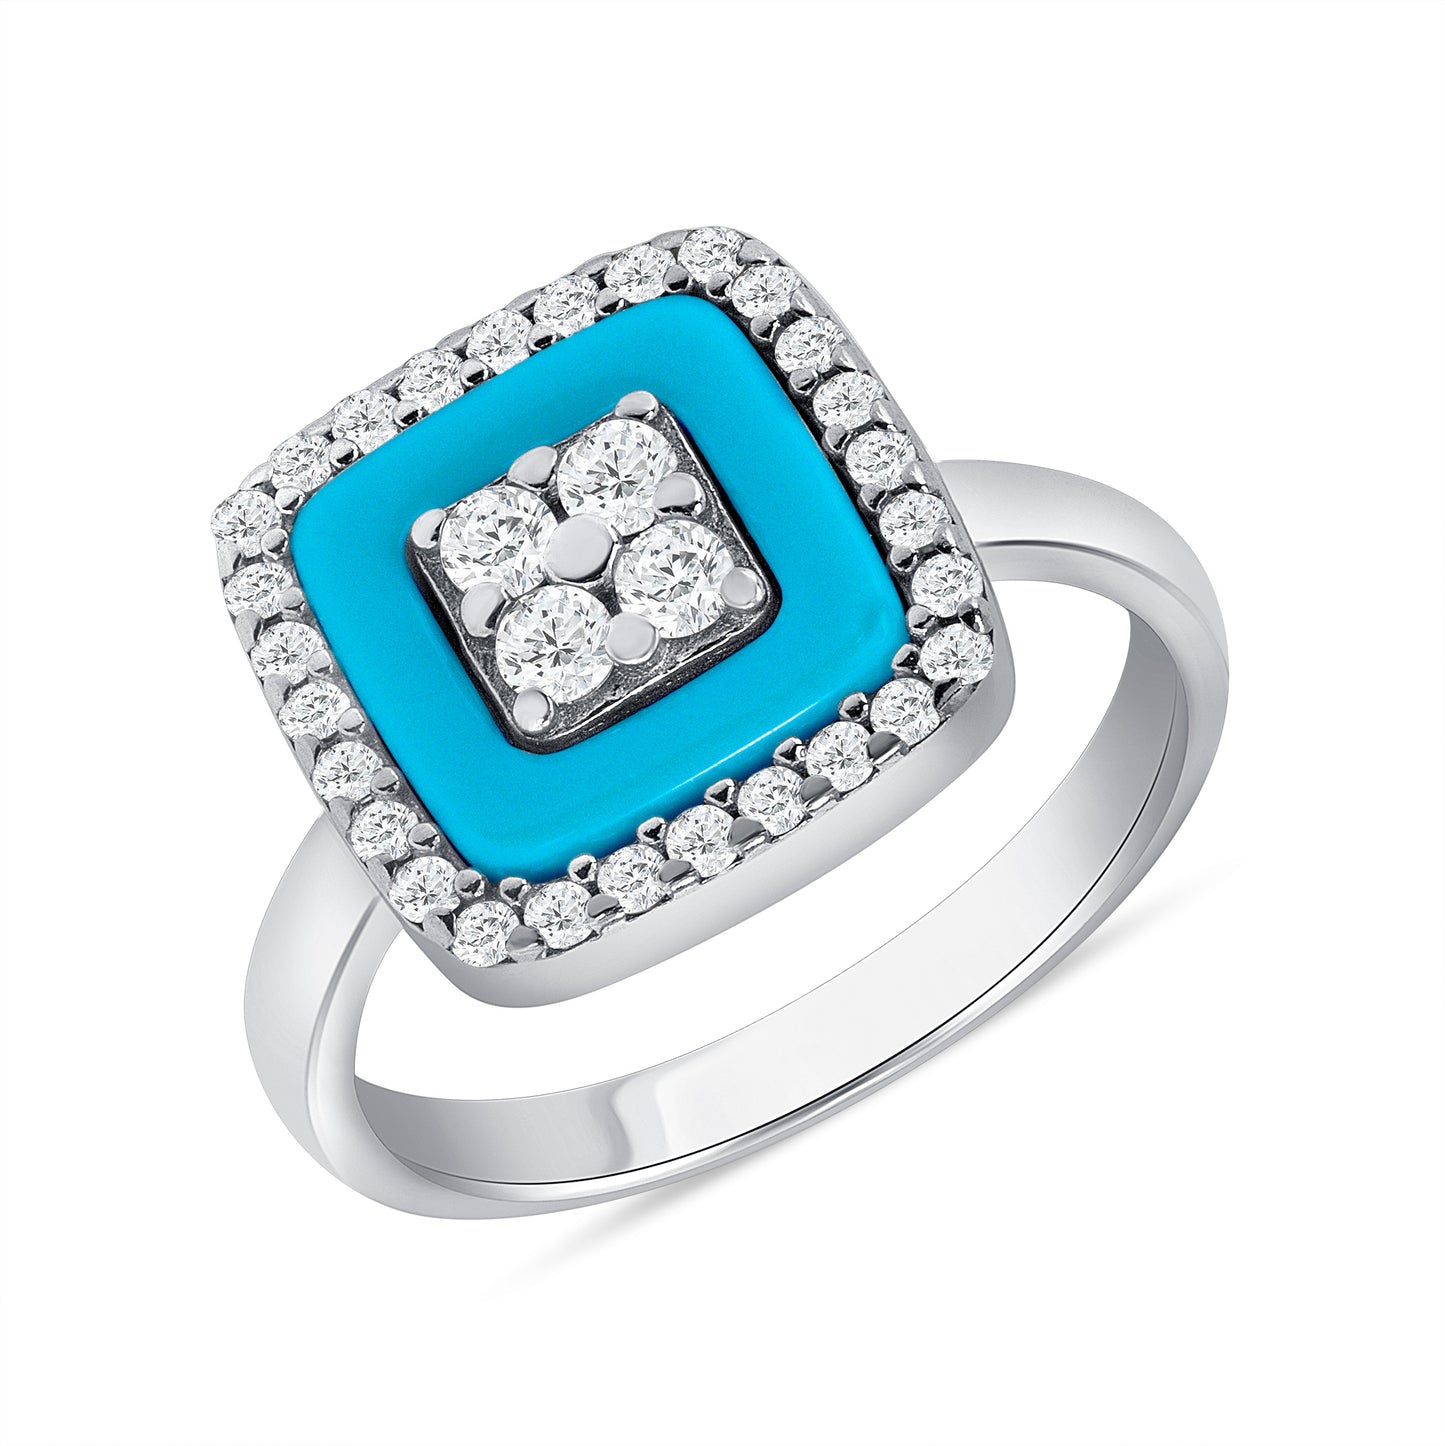 Silver 925 Square w/ Pave Cubic Zirconia Opal. MHY14